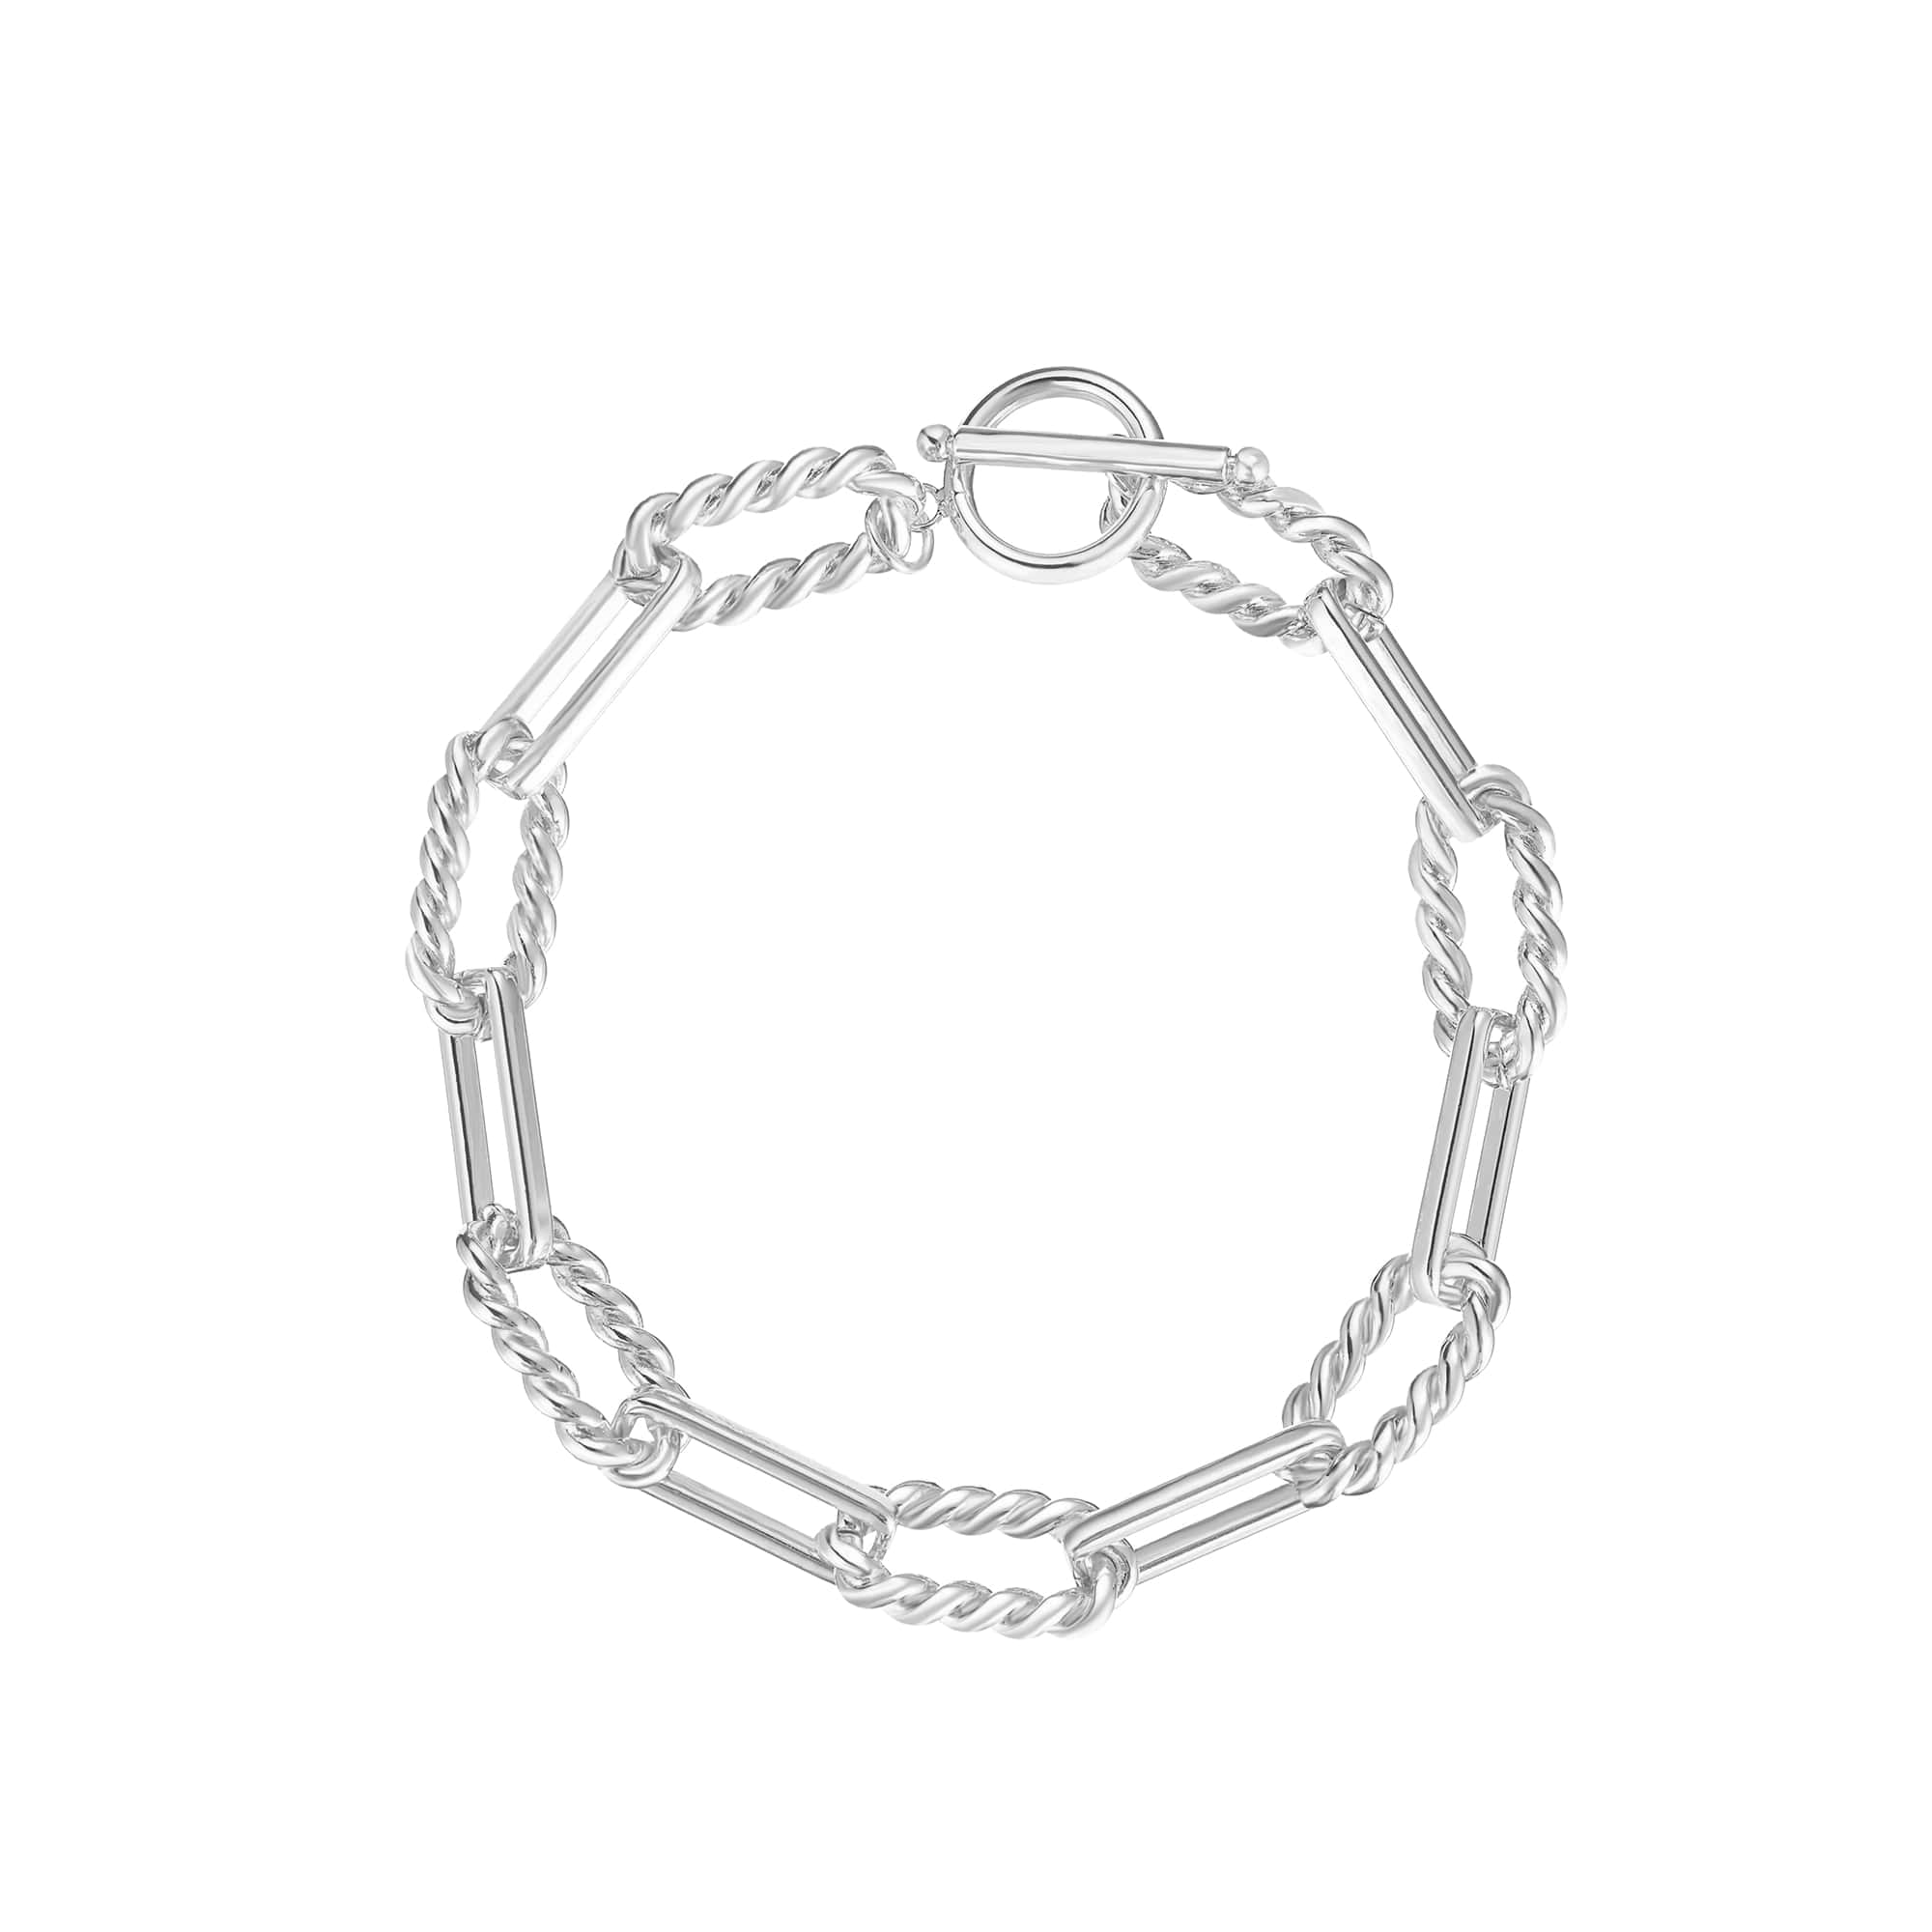 She's Spicy Chain Link Bracelet